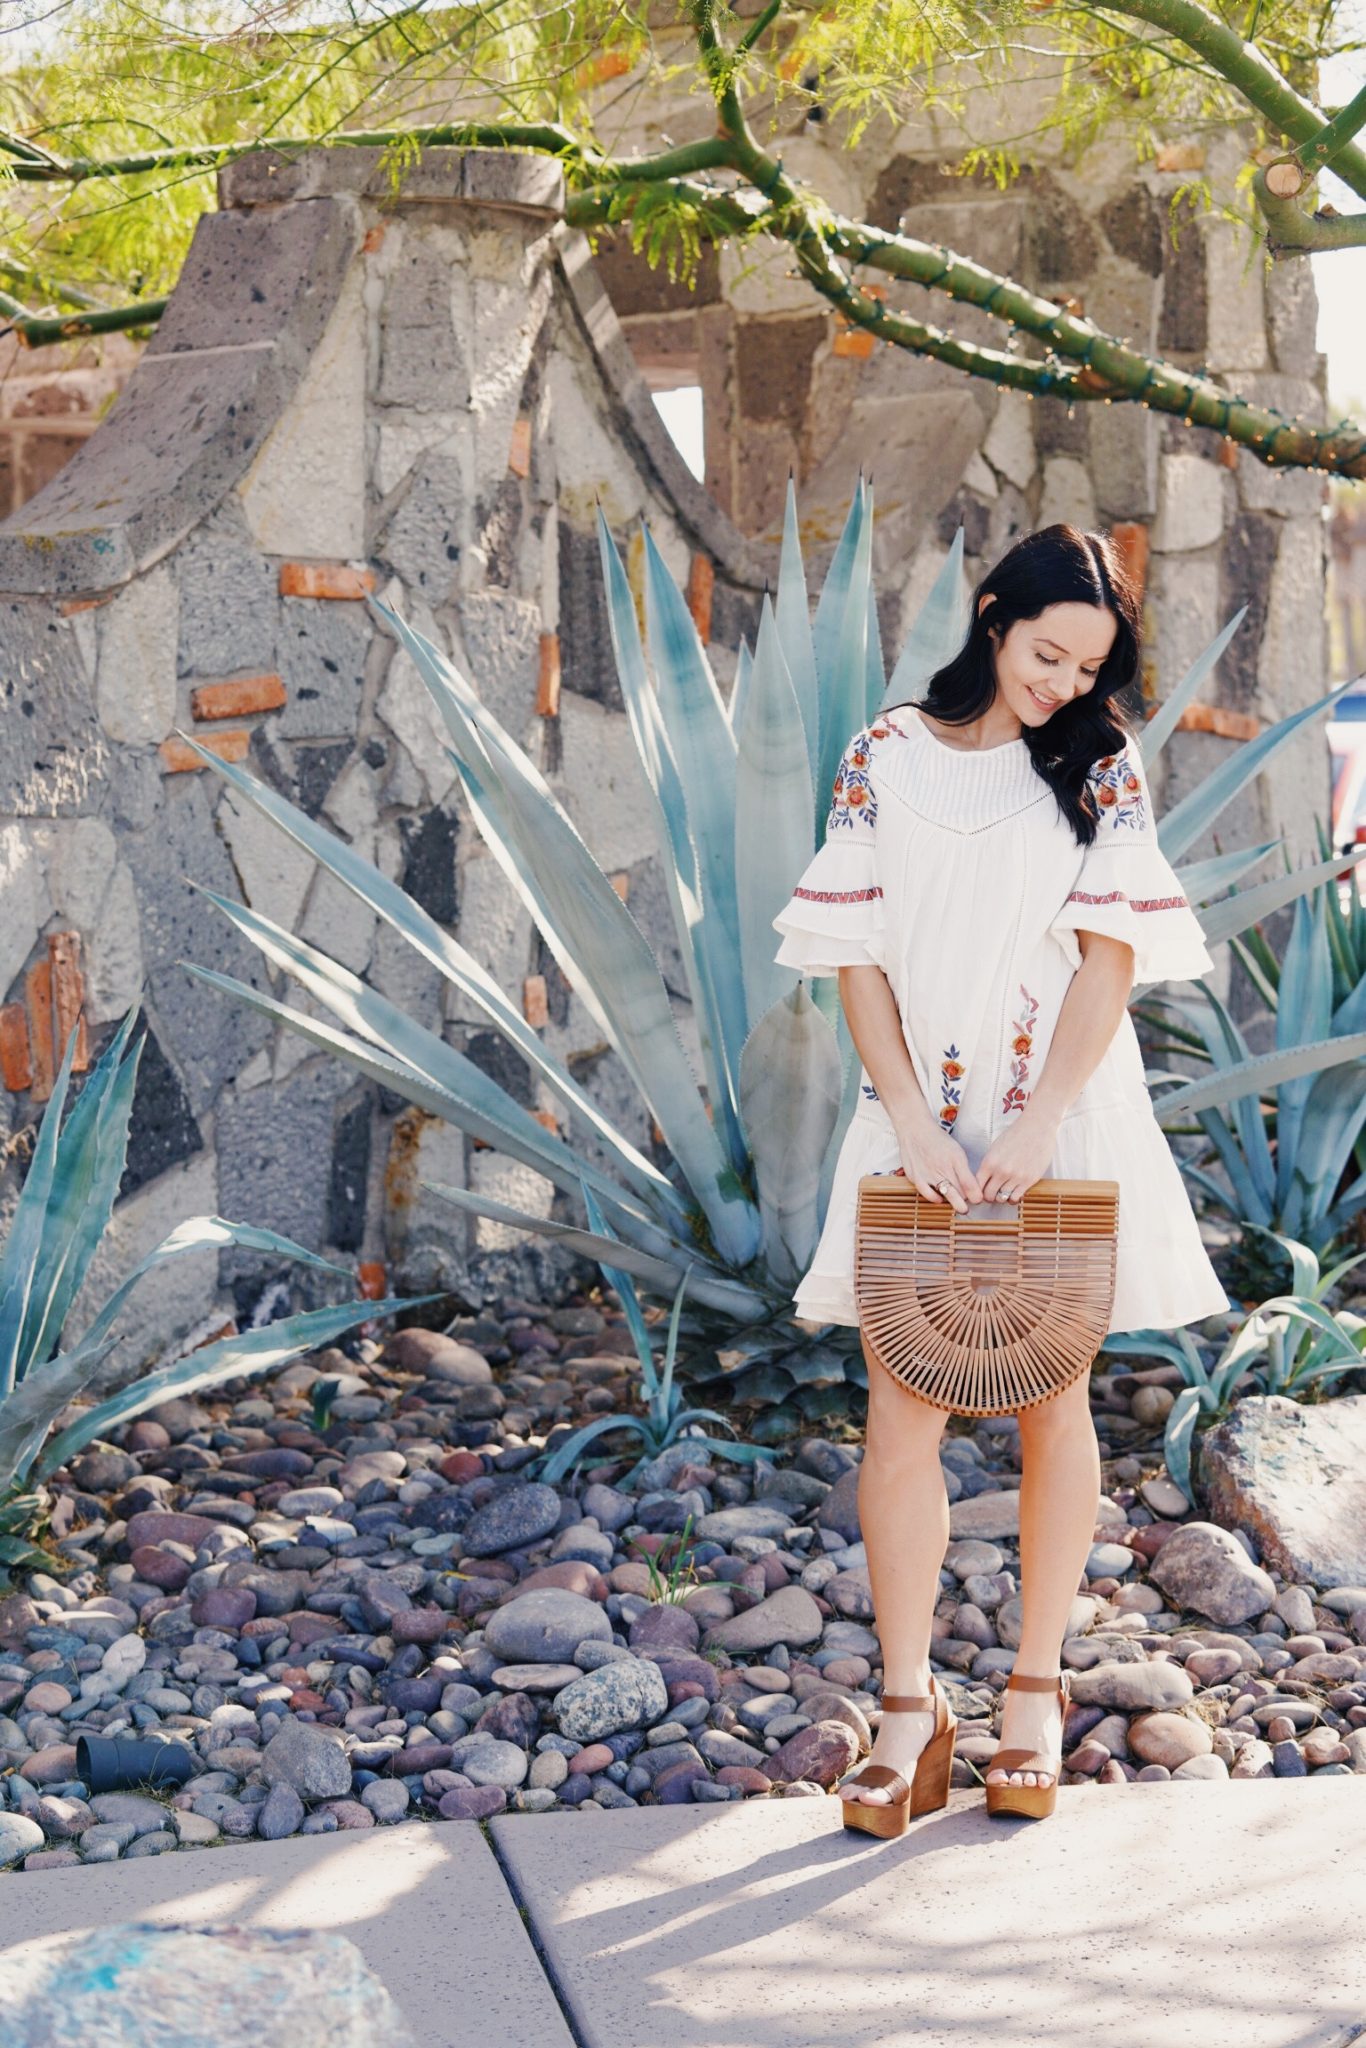 What to Buy from the Shopbop Sale by popular Las Vegas fashion blogger Outfits & Outings